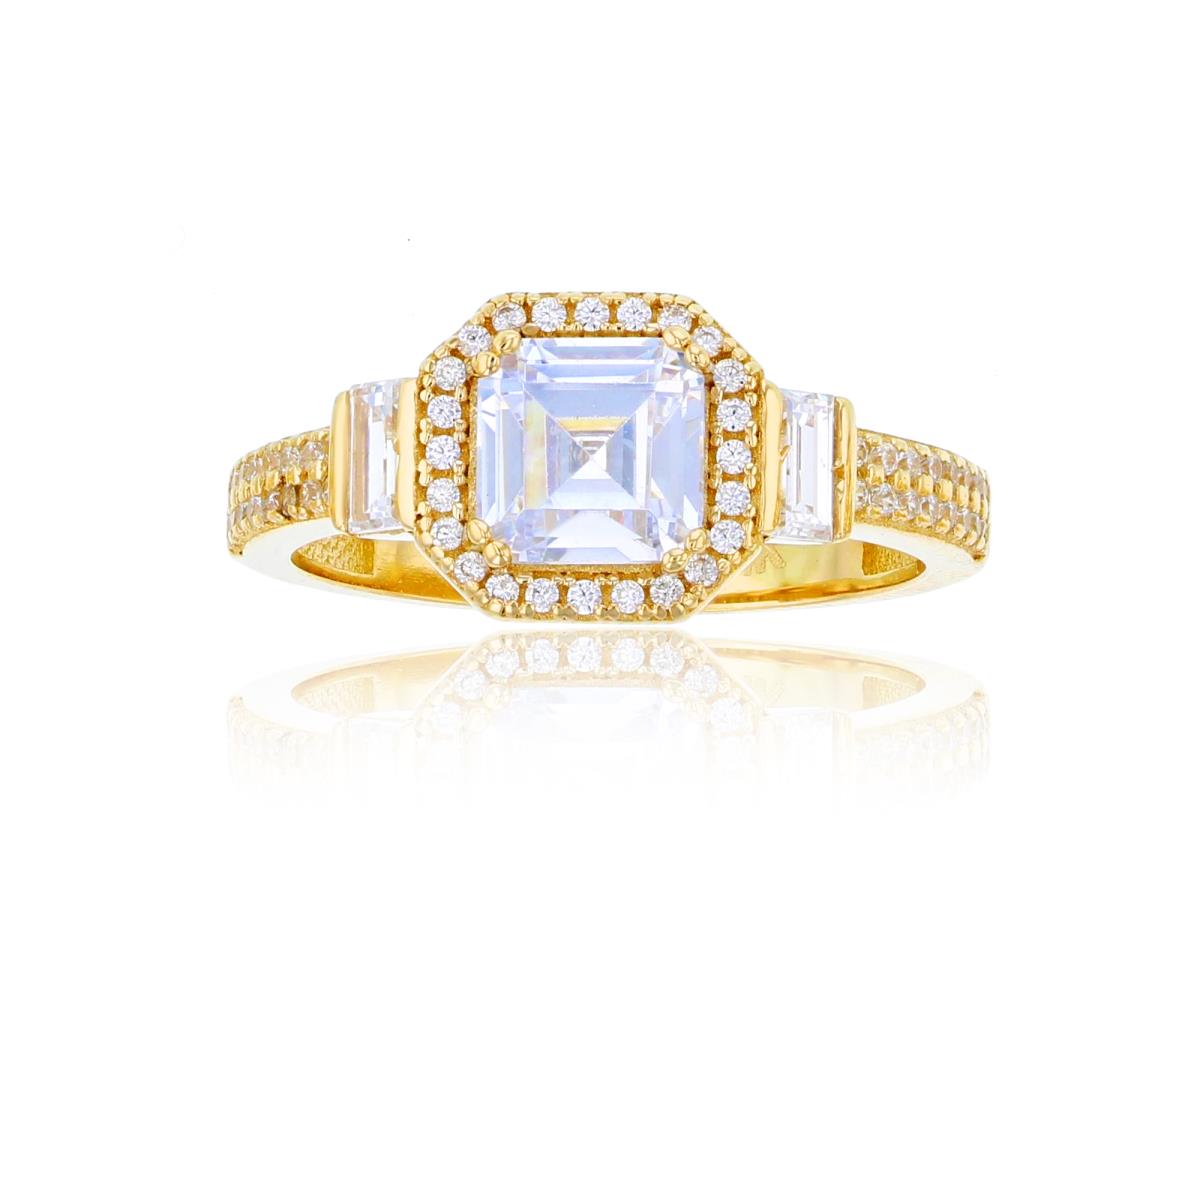 10K Yellow Gold 6mm Asscher Cut CZ Halo Baguette Sides & Micropave Fashion Ring